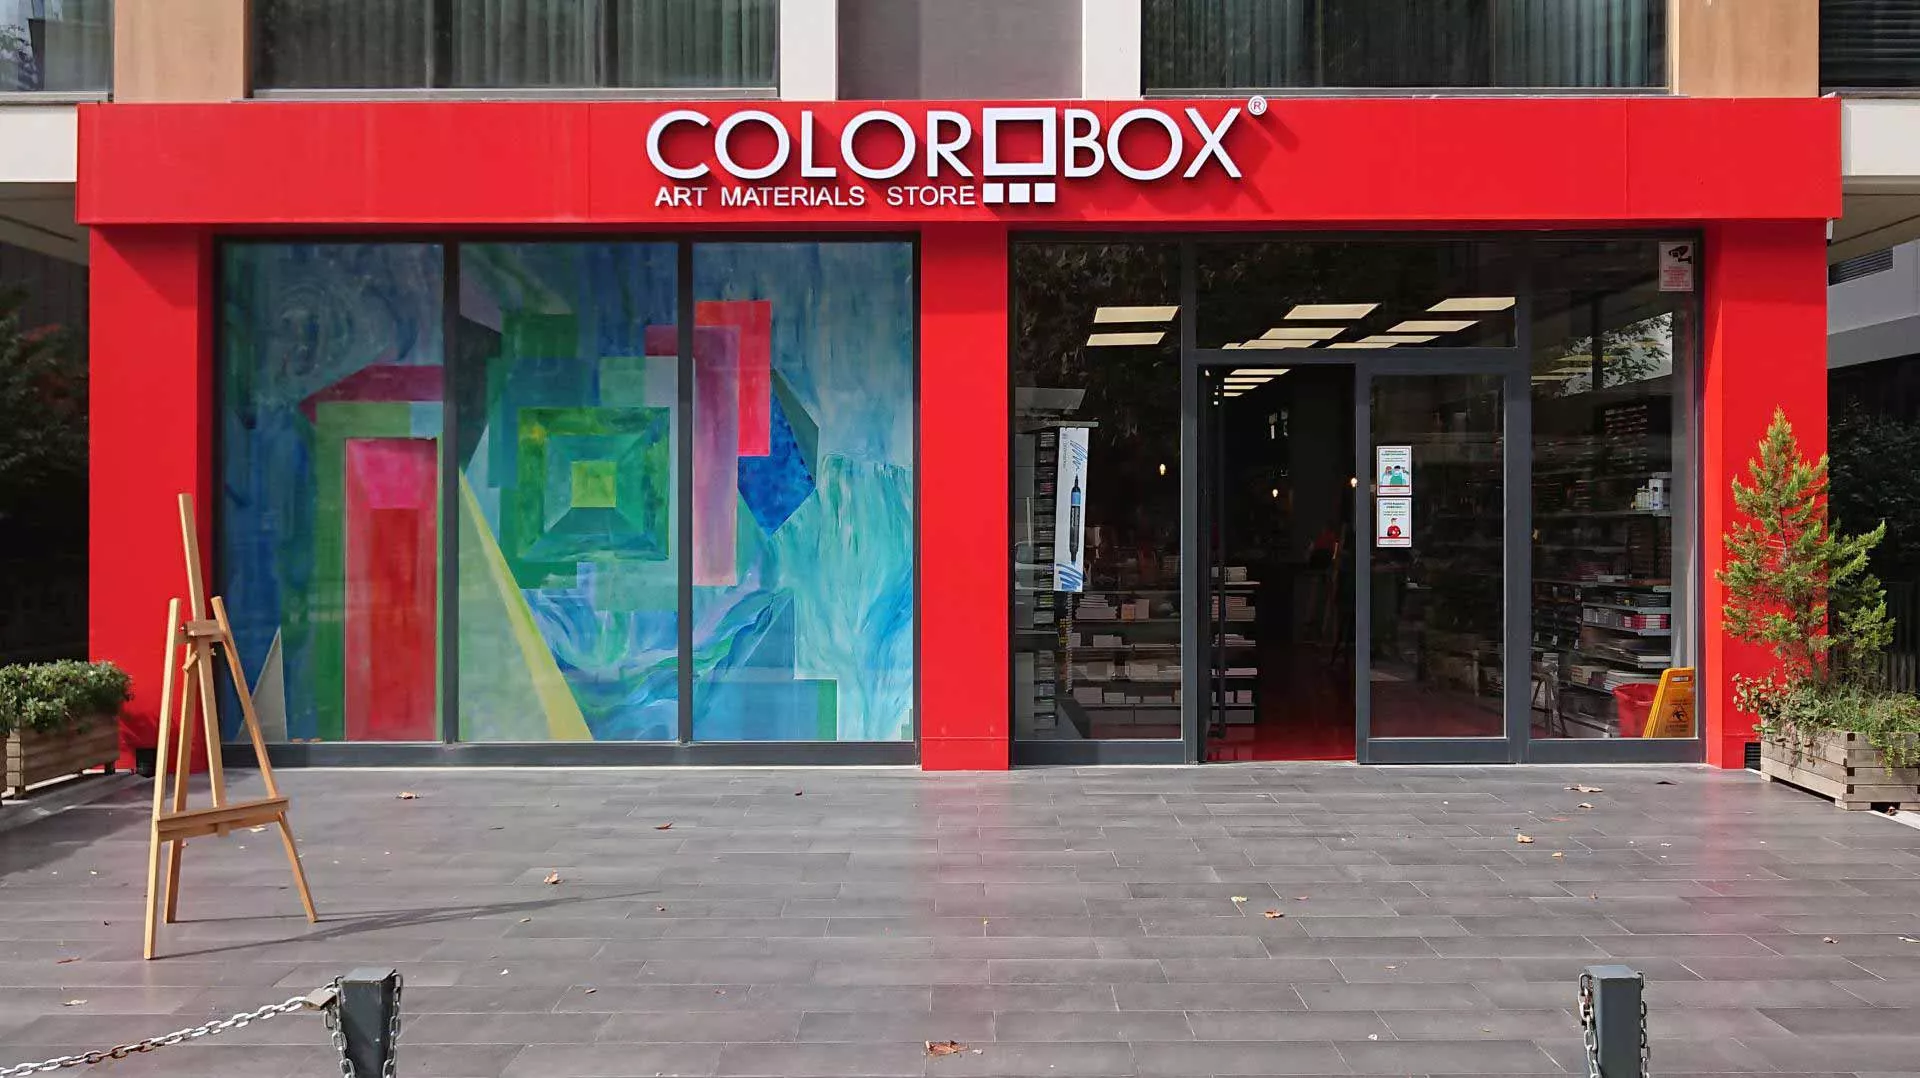 Color Box - Art Materials Store in Turkey, central_asia | Art - Country Helper